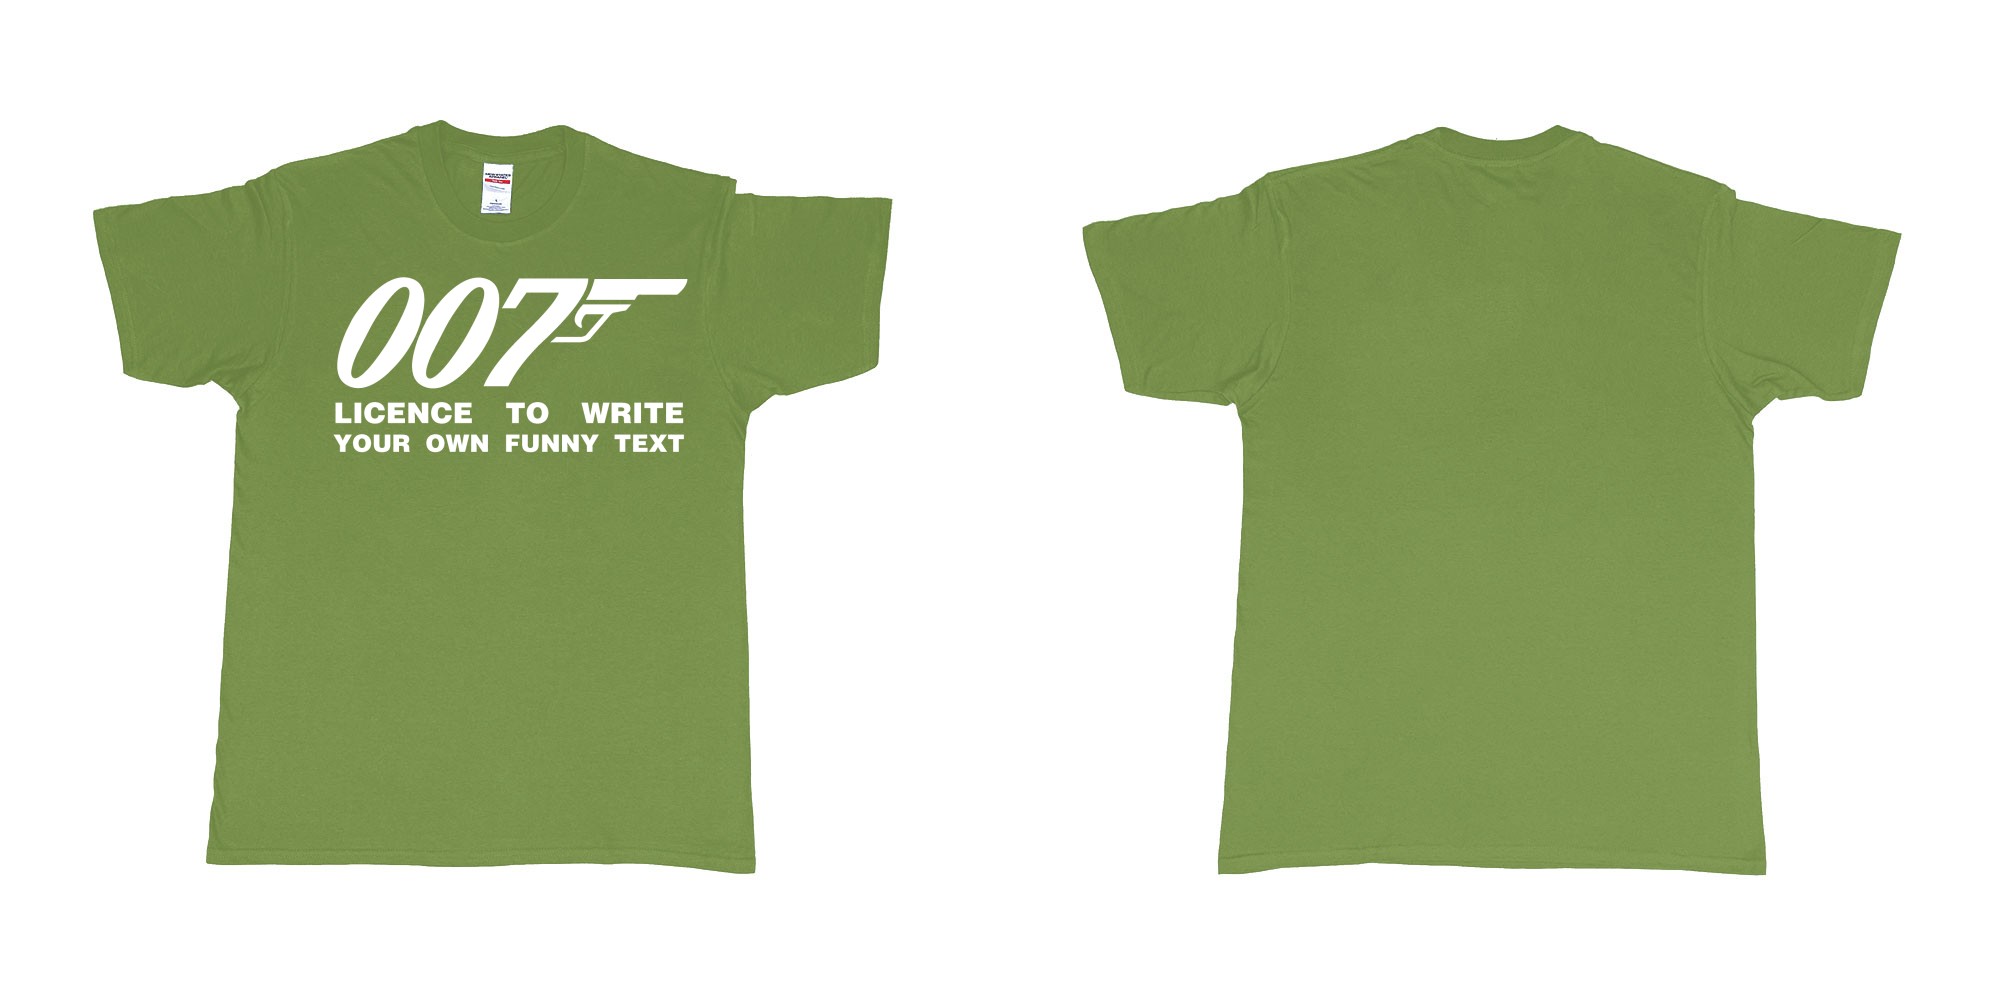 Custom tshirt design james bond logo licence to write own custom text print in fabric color military-green choice your own text made in Bali by The Pirate Way